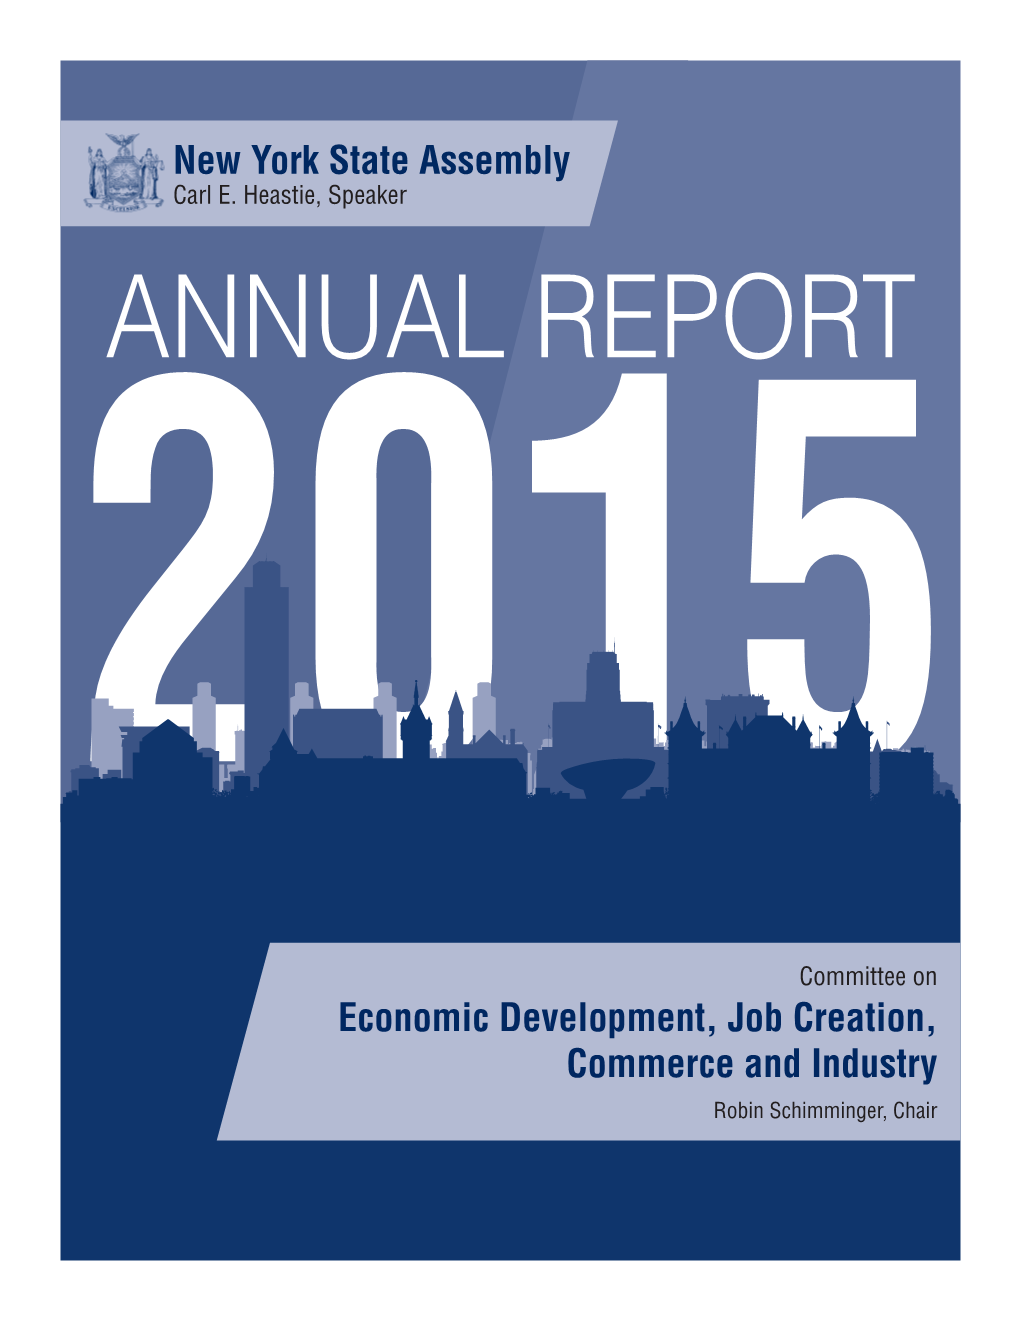 New York State Assembly Economic Development, Job Creation, Commerce and Industry